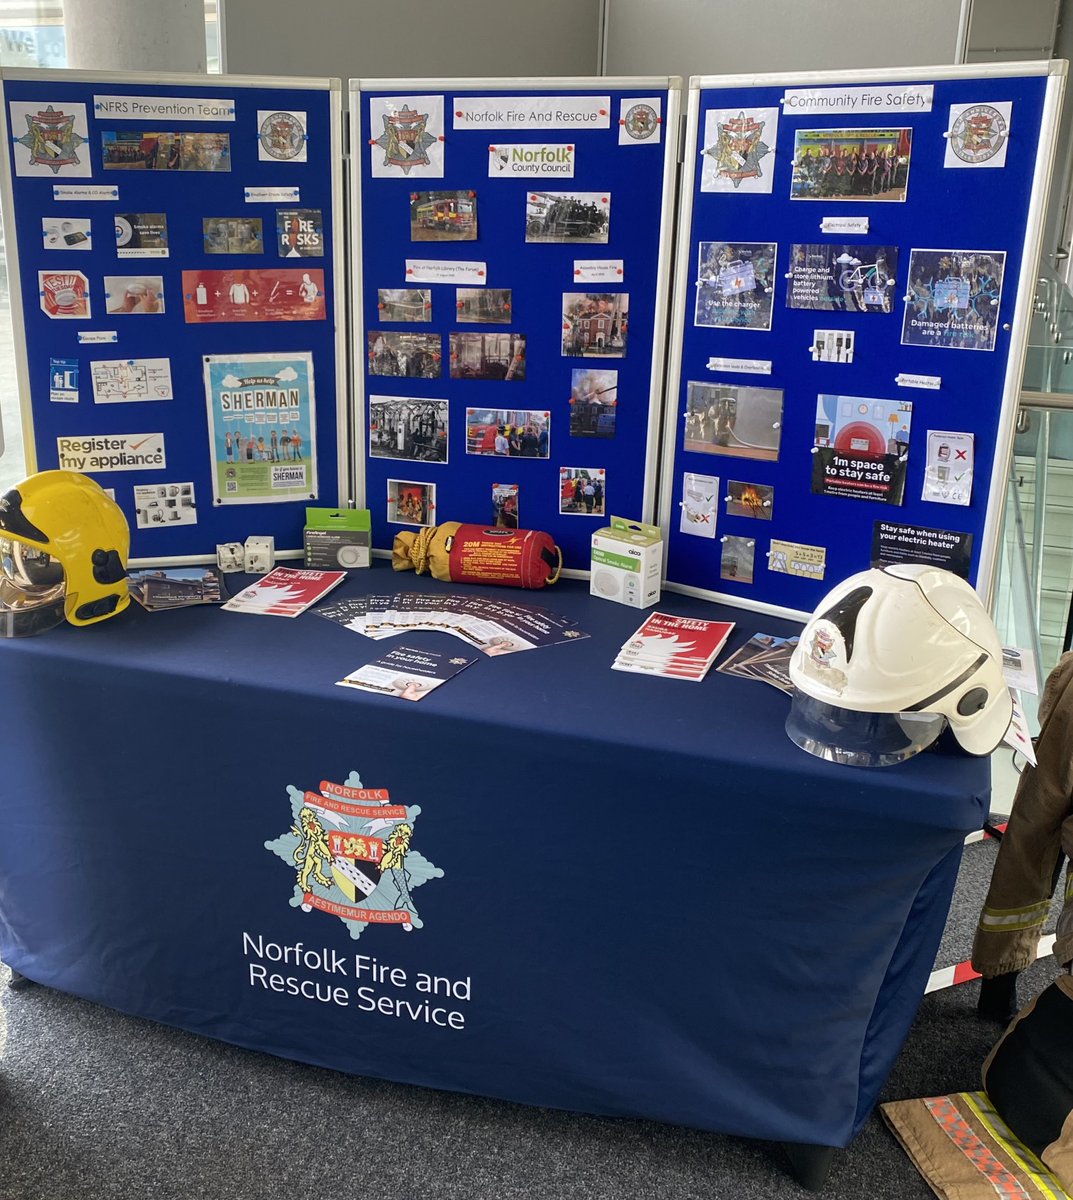 Our Prevention Team were at @TheForumNorwich today as part of their @DyingMatters event, offering advice on how to keep loved ones safe from fire at home.

To find out more about free home fire safety visits, click on the link in the comments section below. 👇

#dyingmatters